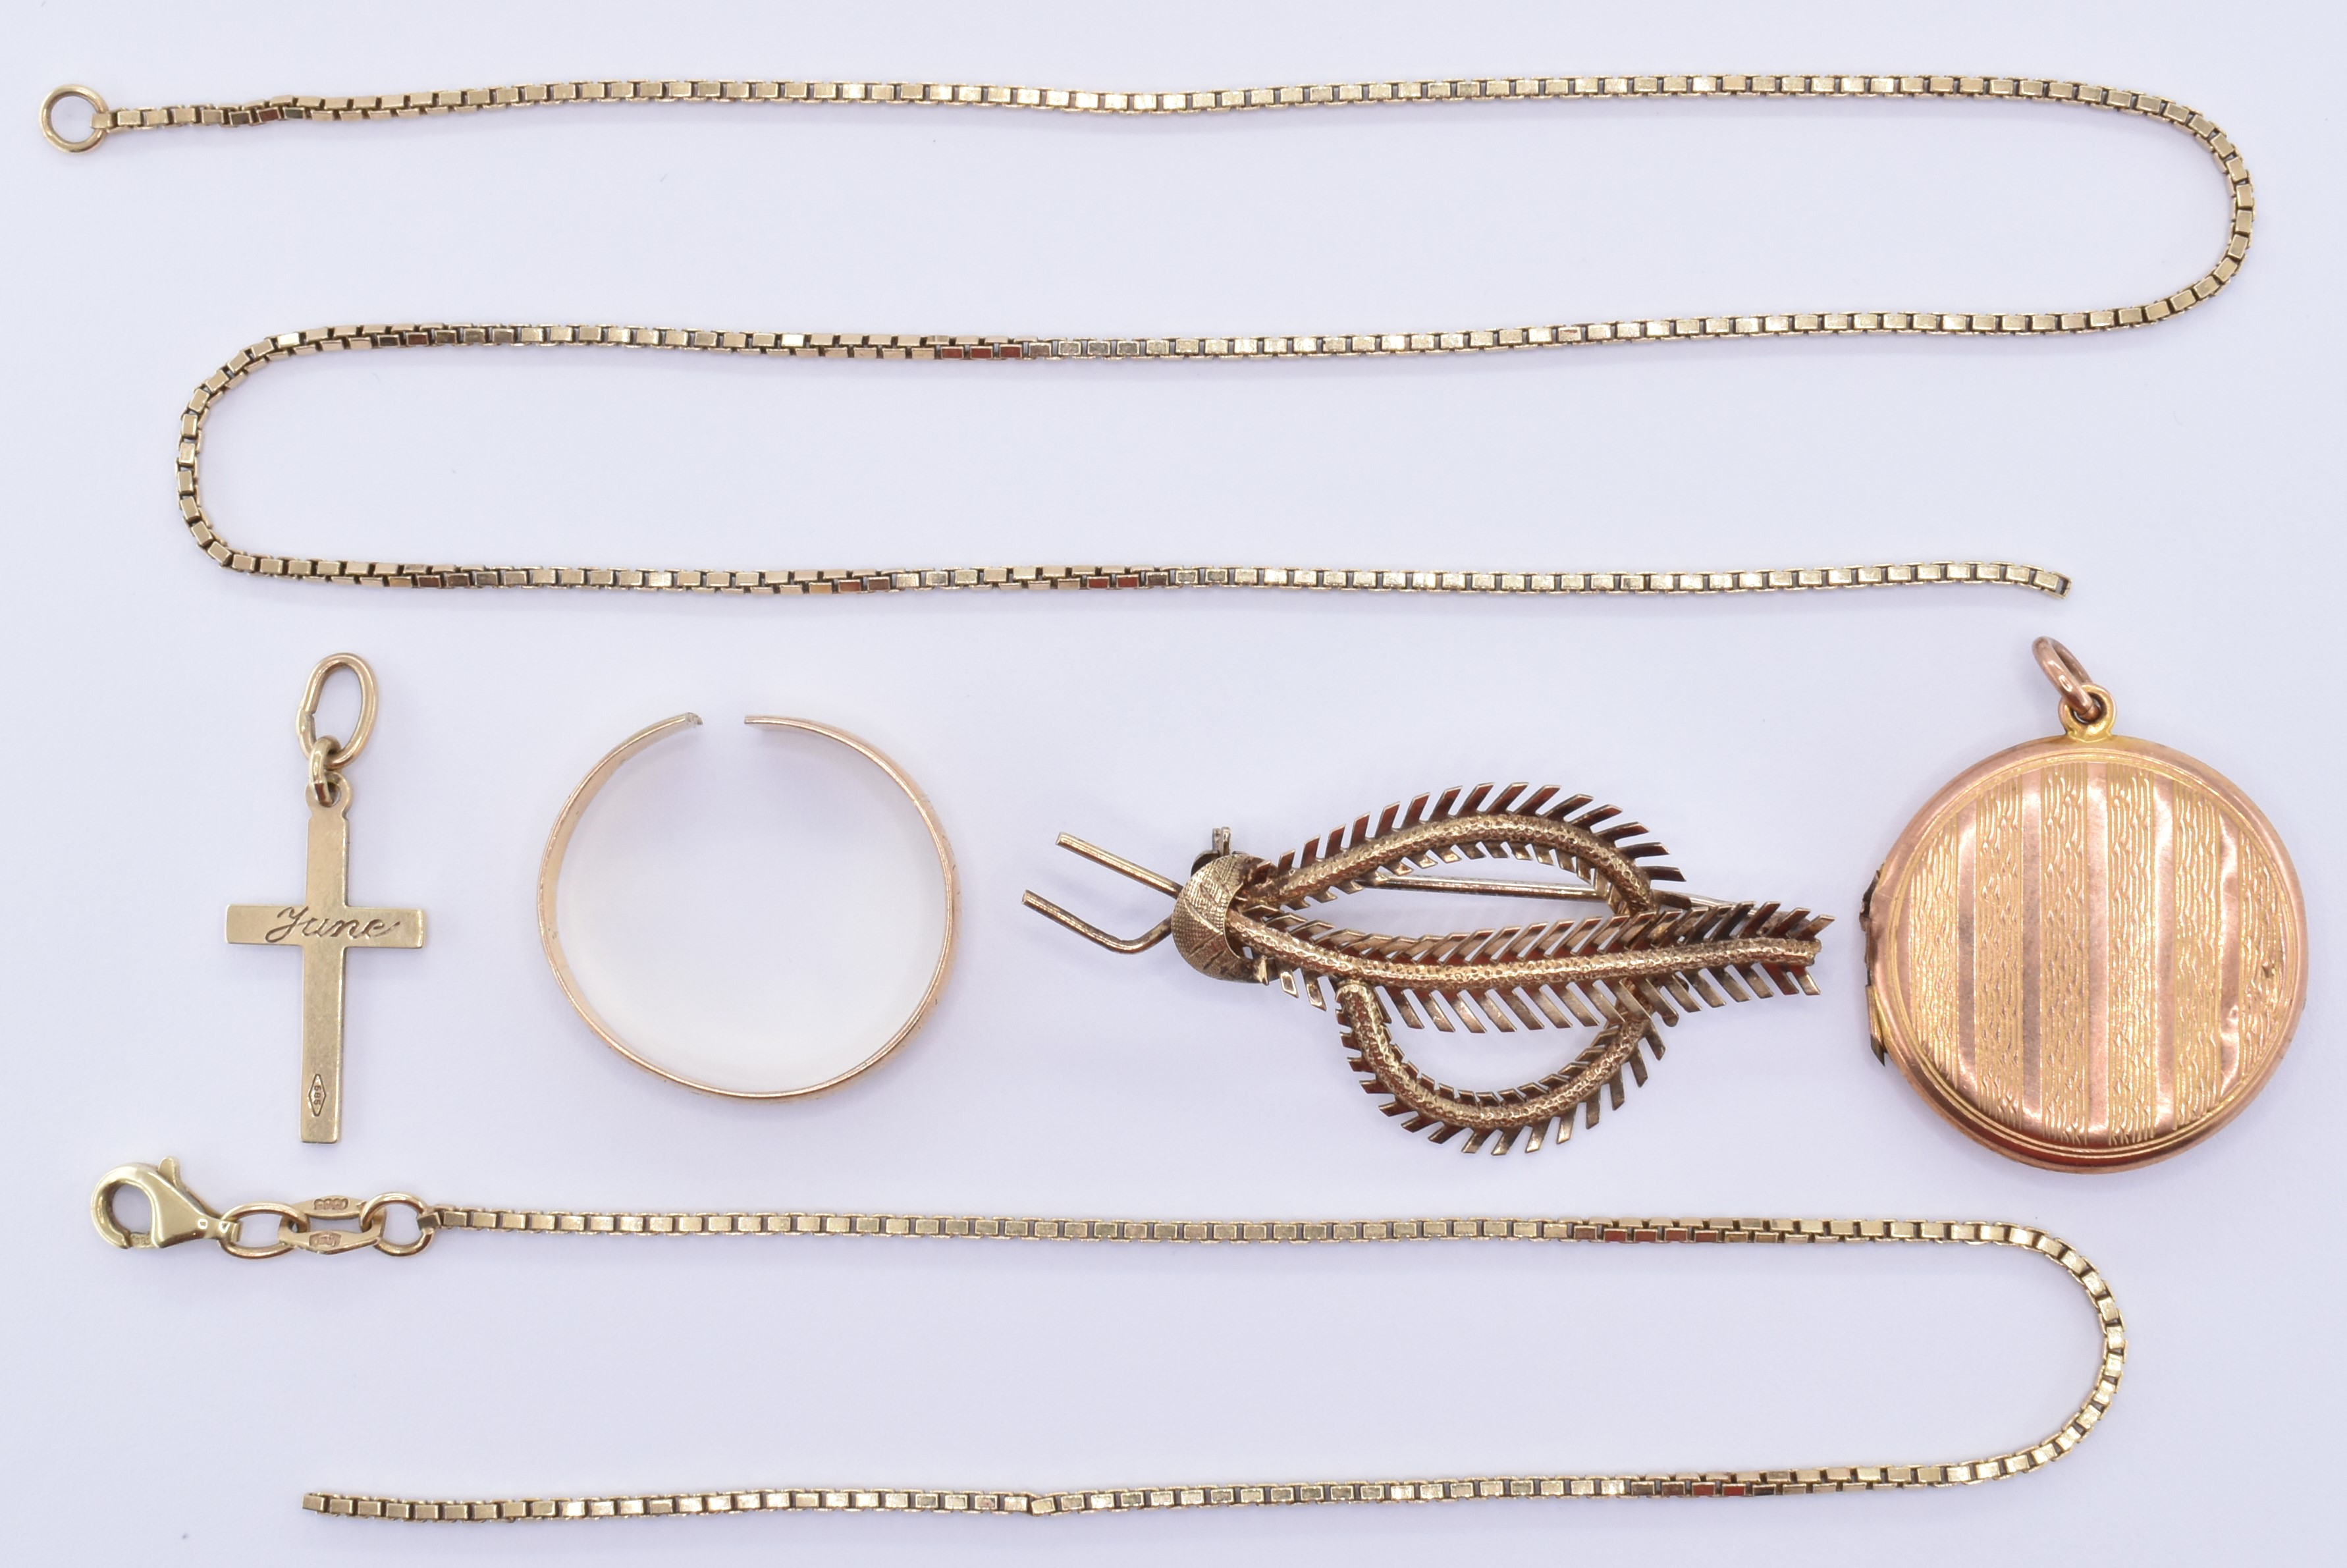 GROUP OF 20TH CENTURY GOLD JEWELLERY